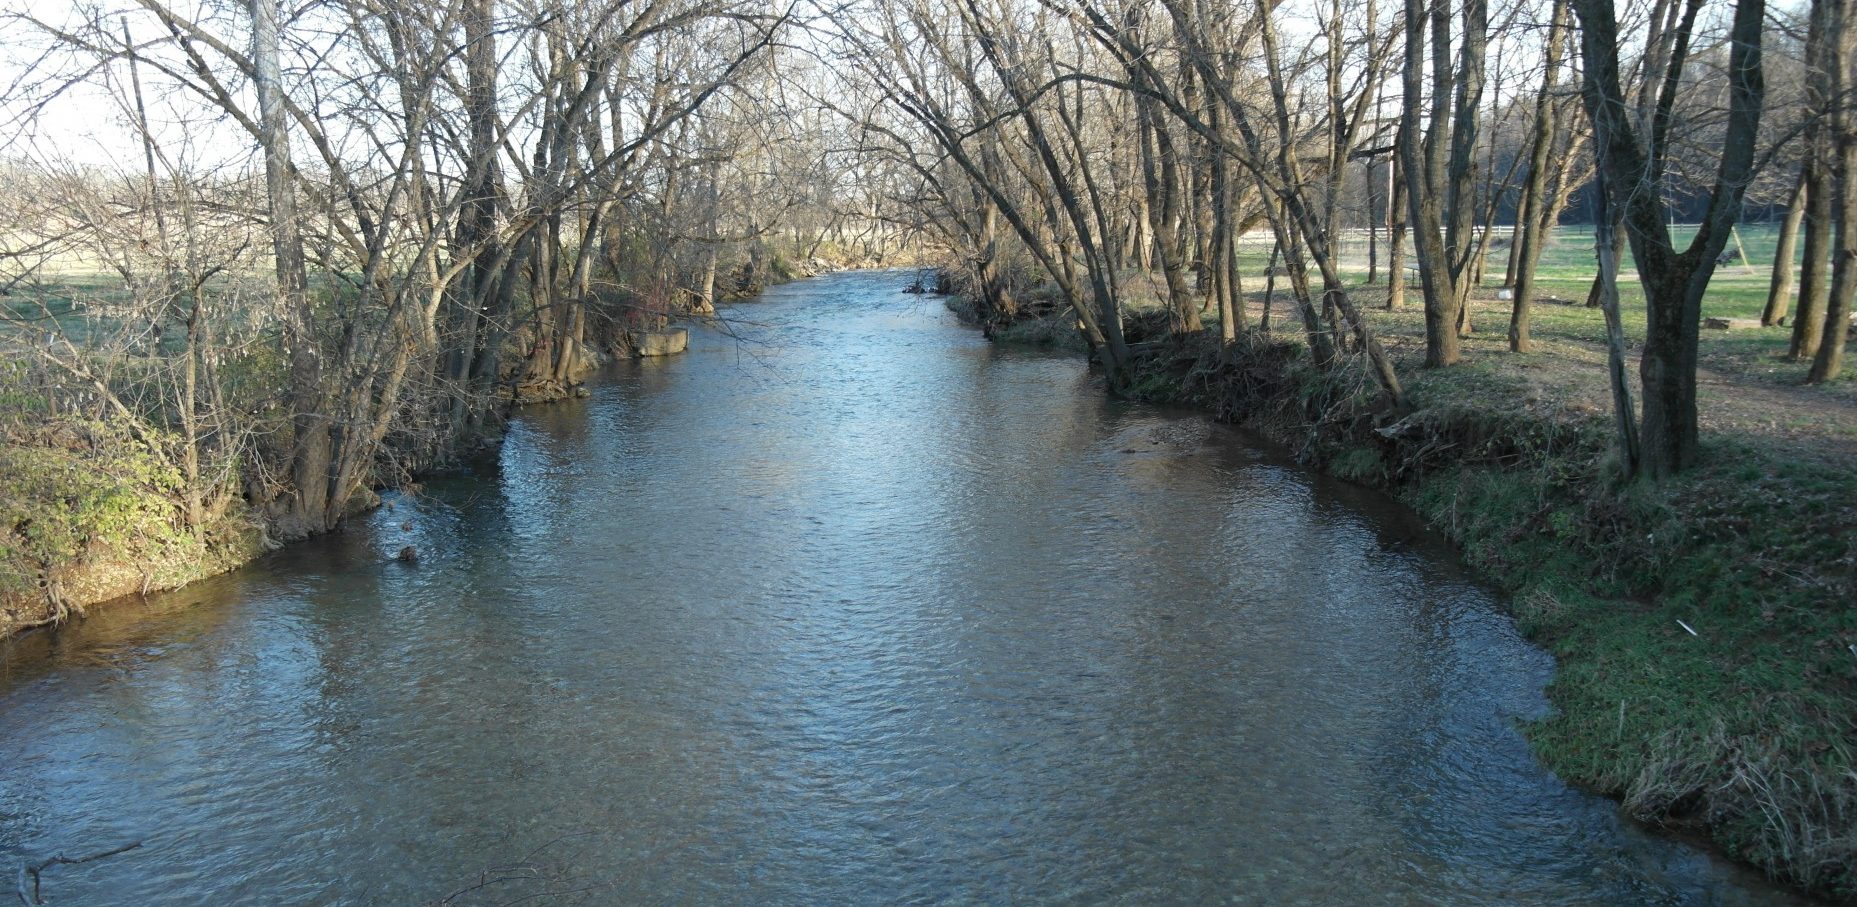 UA Researcher Tracks the Source of Pathogen Pollution in the Illinois River Watershed